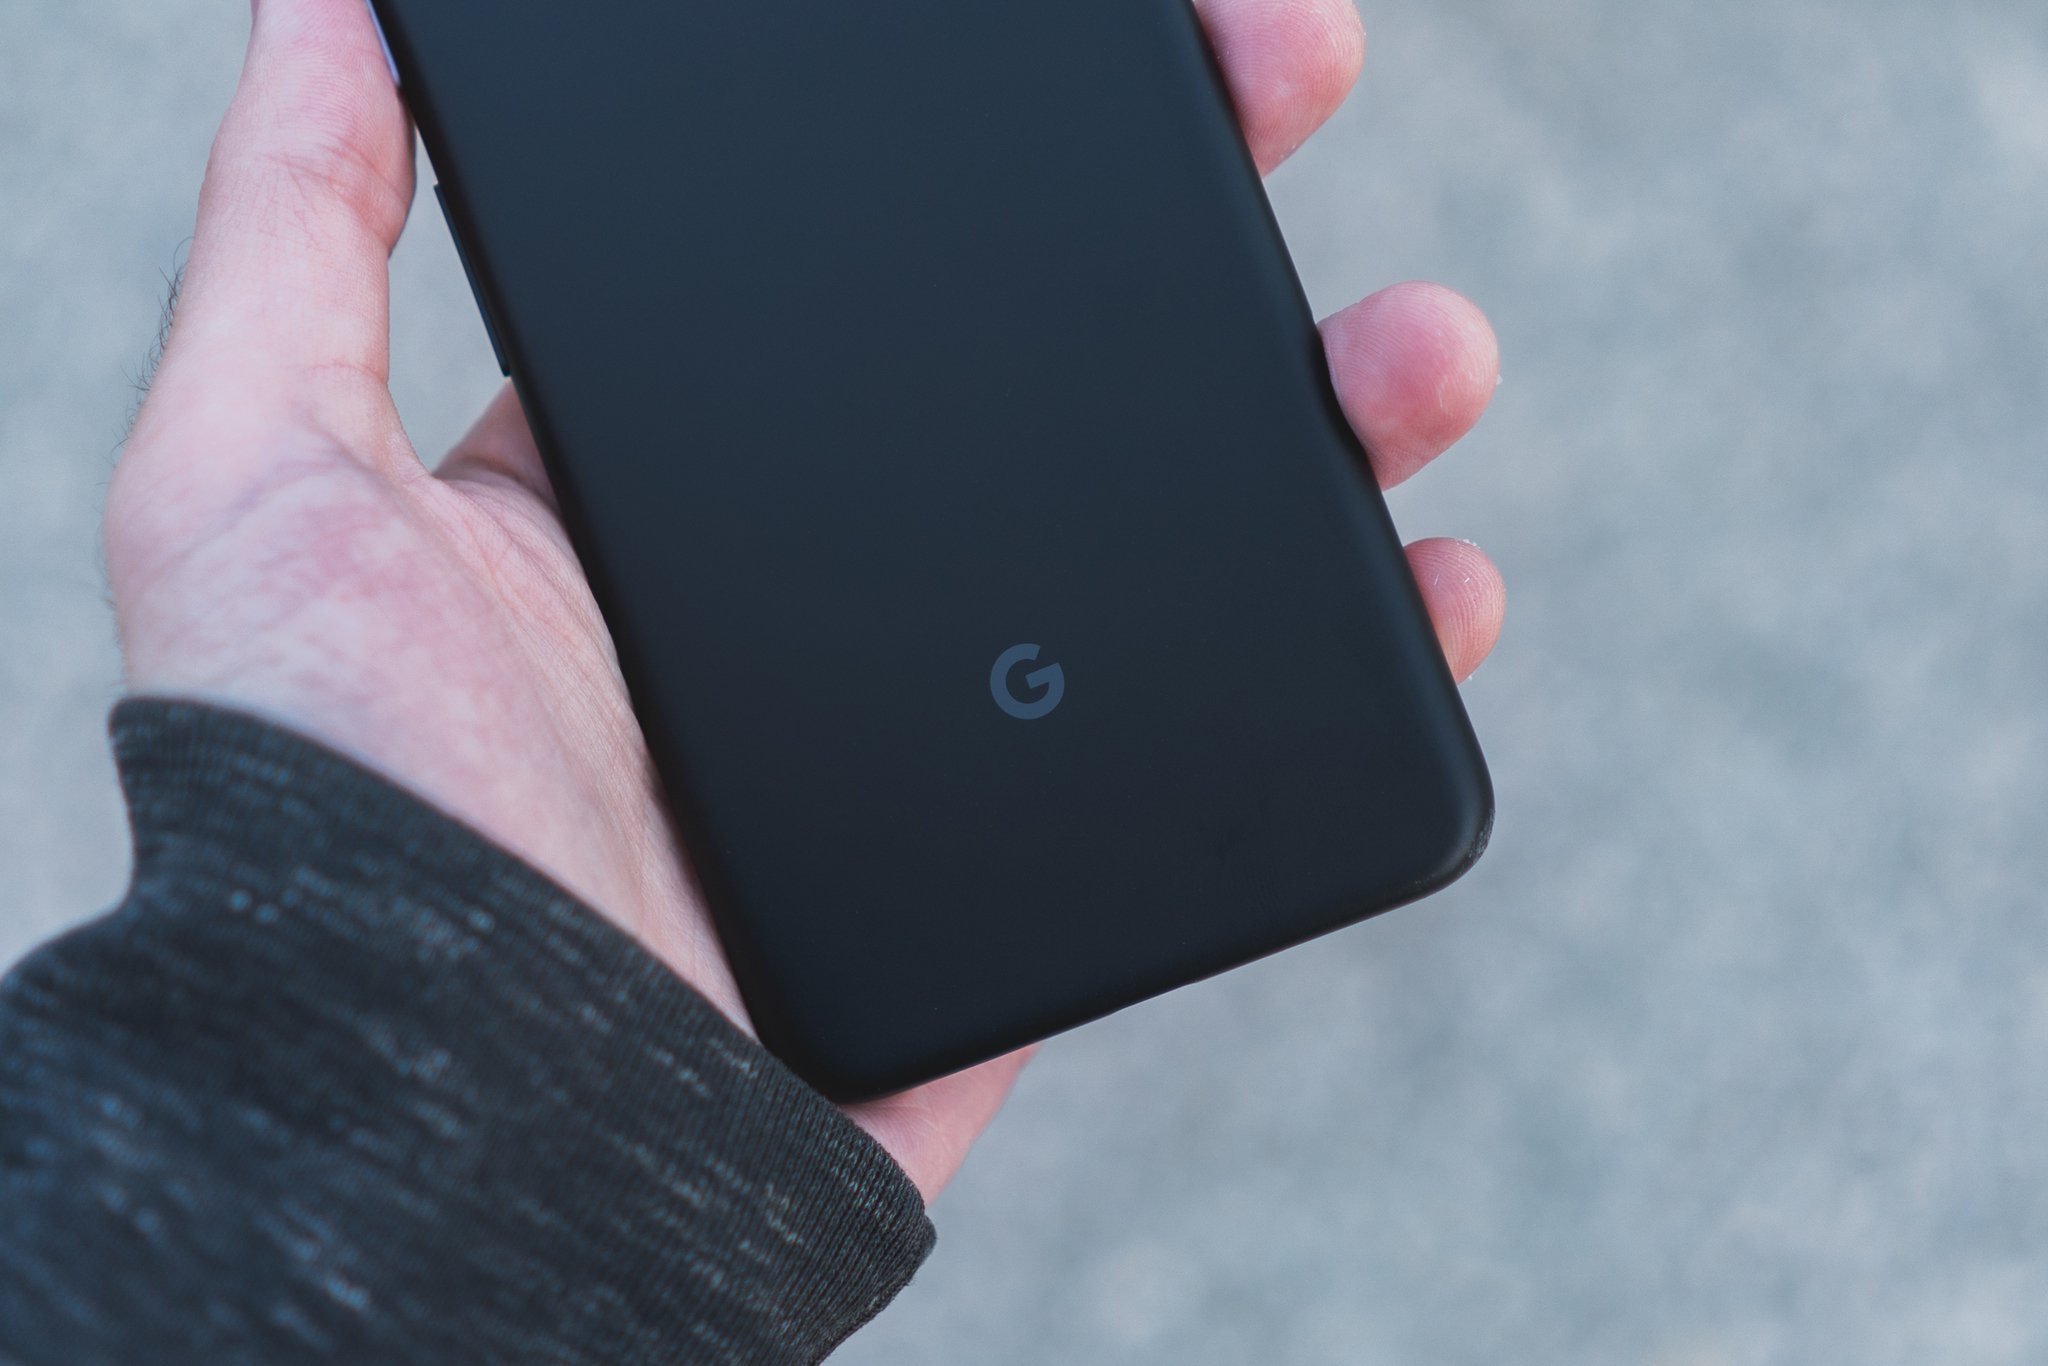 How to enable Adaptive Sound on your Google Pixel phone